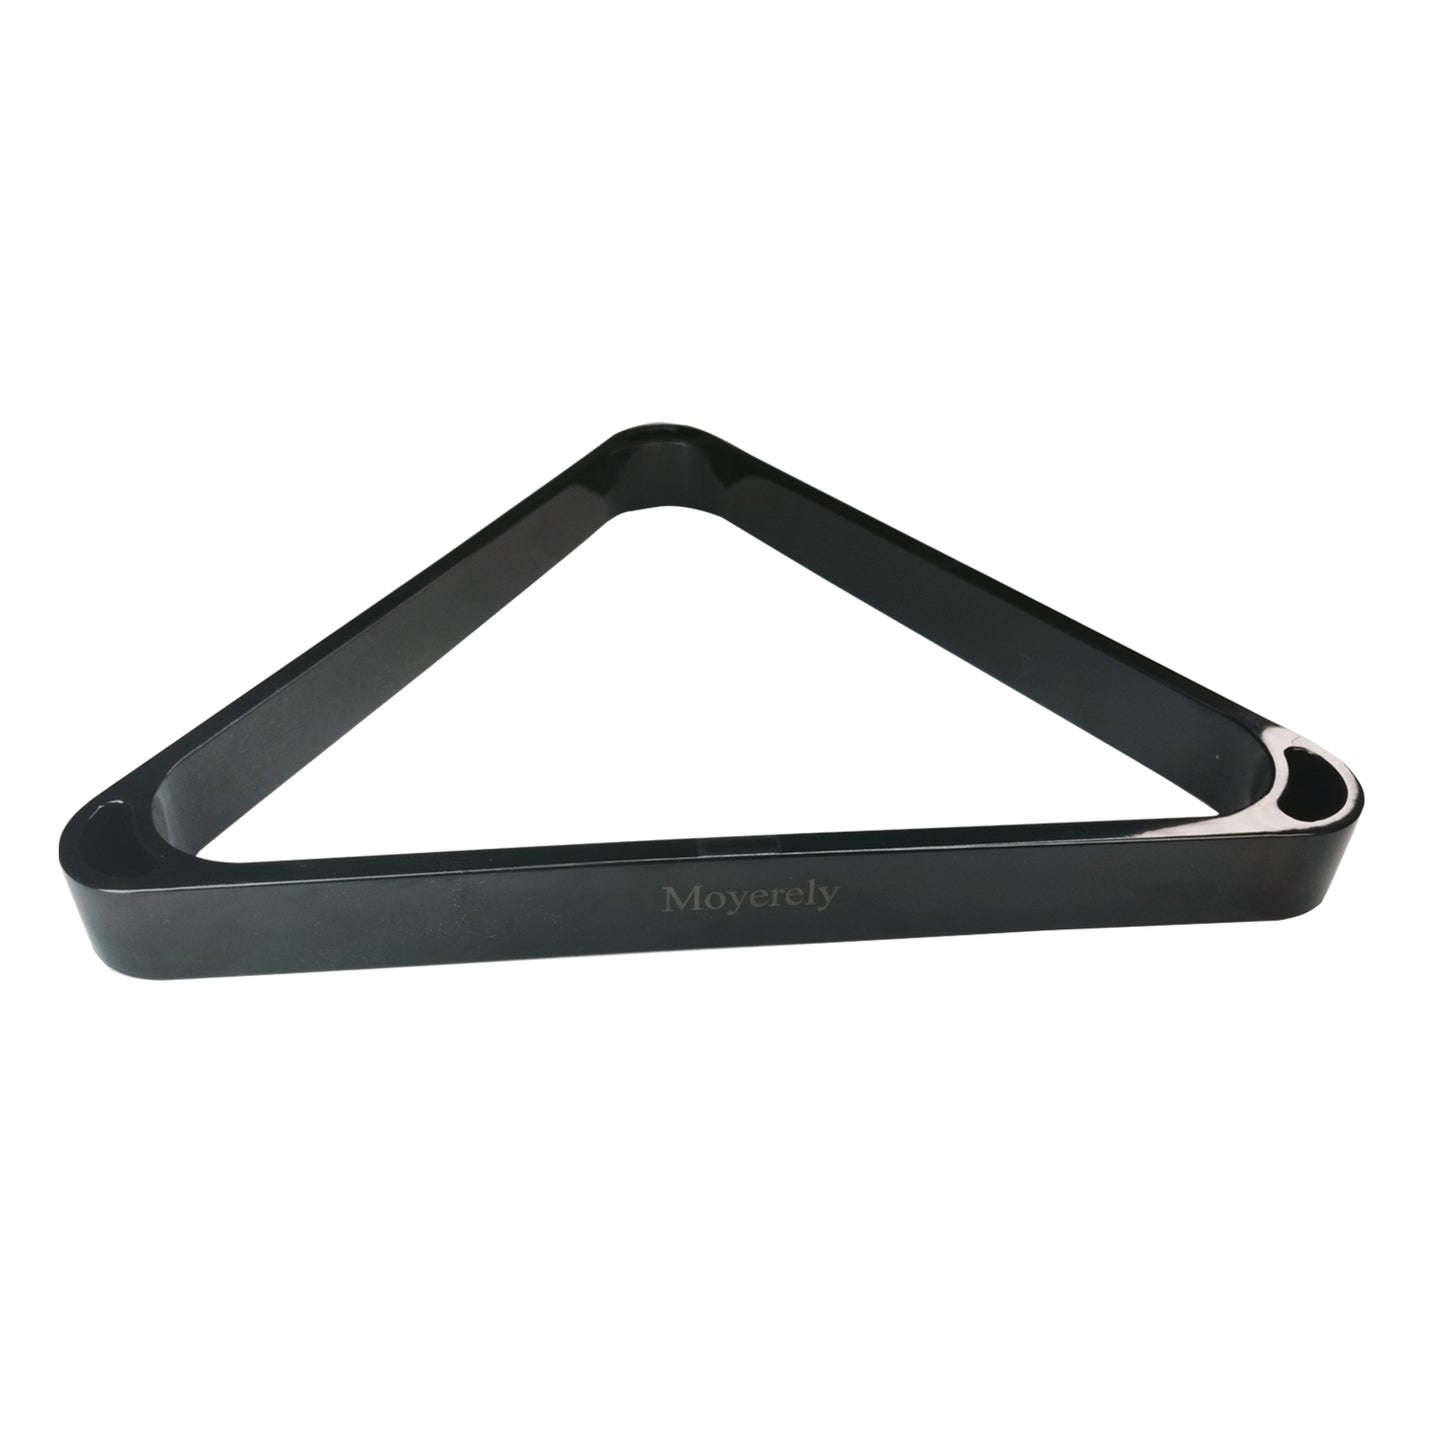 Moyerely Billiard Triangle /Pool Table Accessory: 8-Ball Rack, Holds Standard 2-1/4" Sized Balls